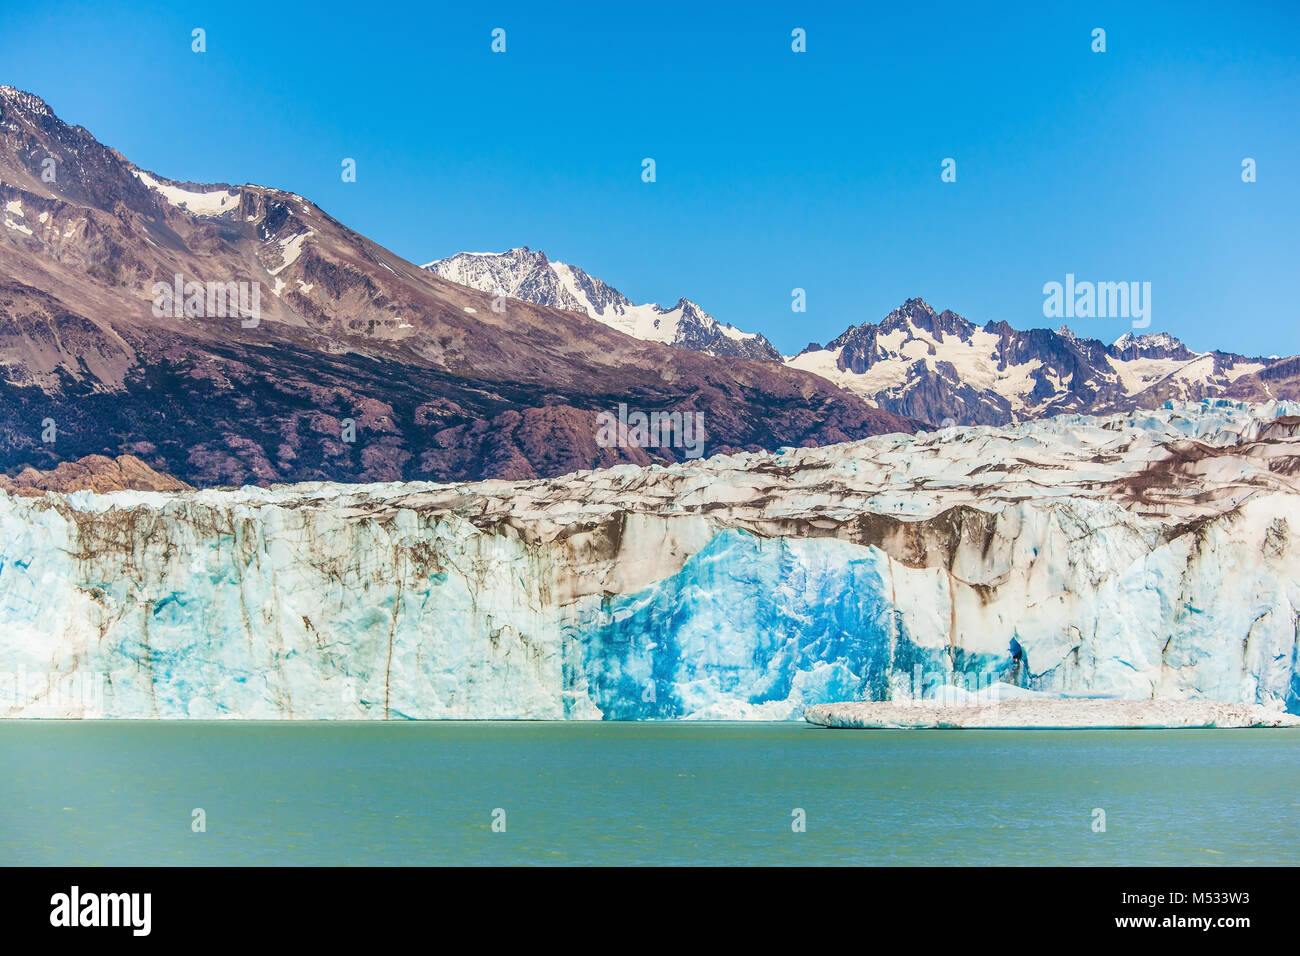 In the water ice-floes, broken away from a glacier Stock Photo